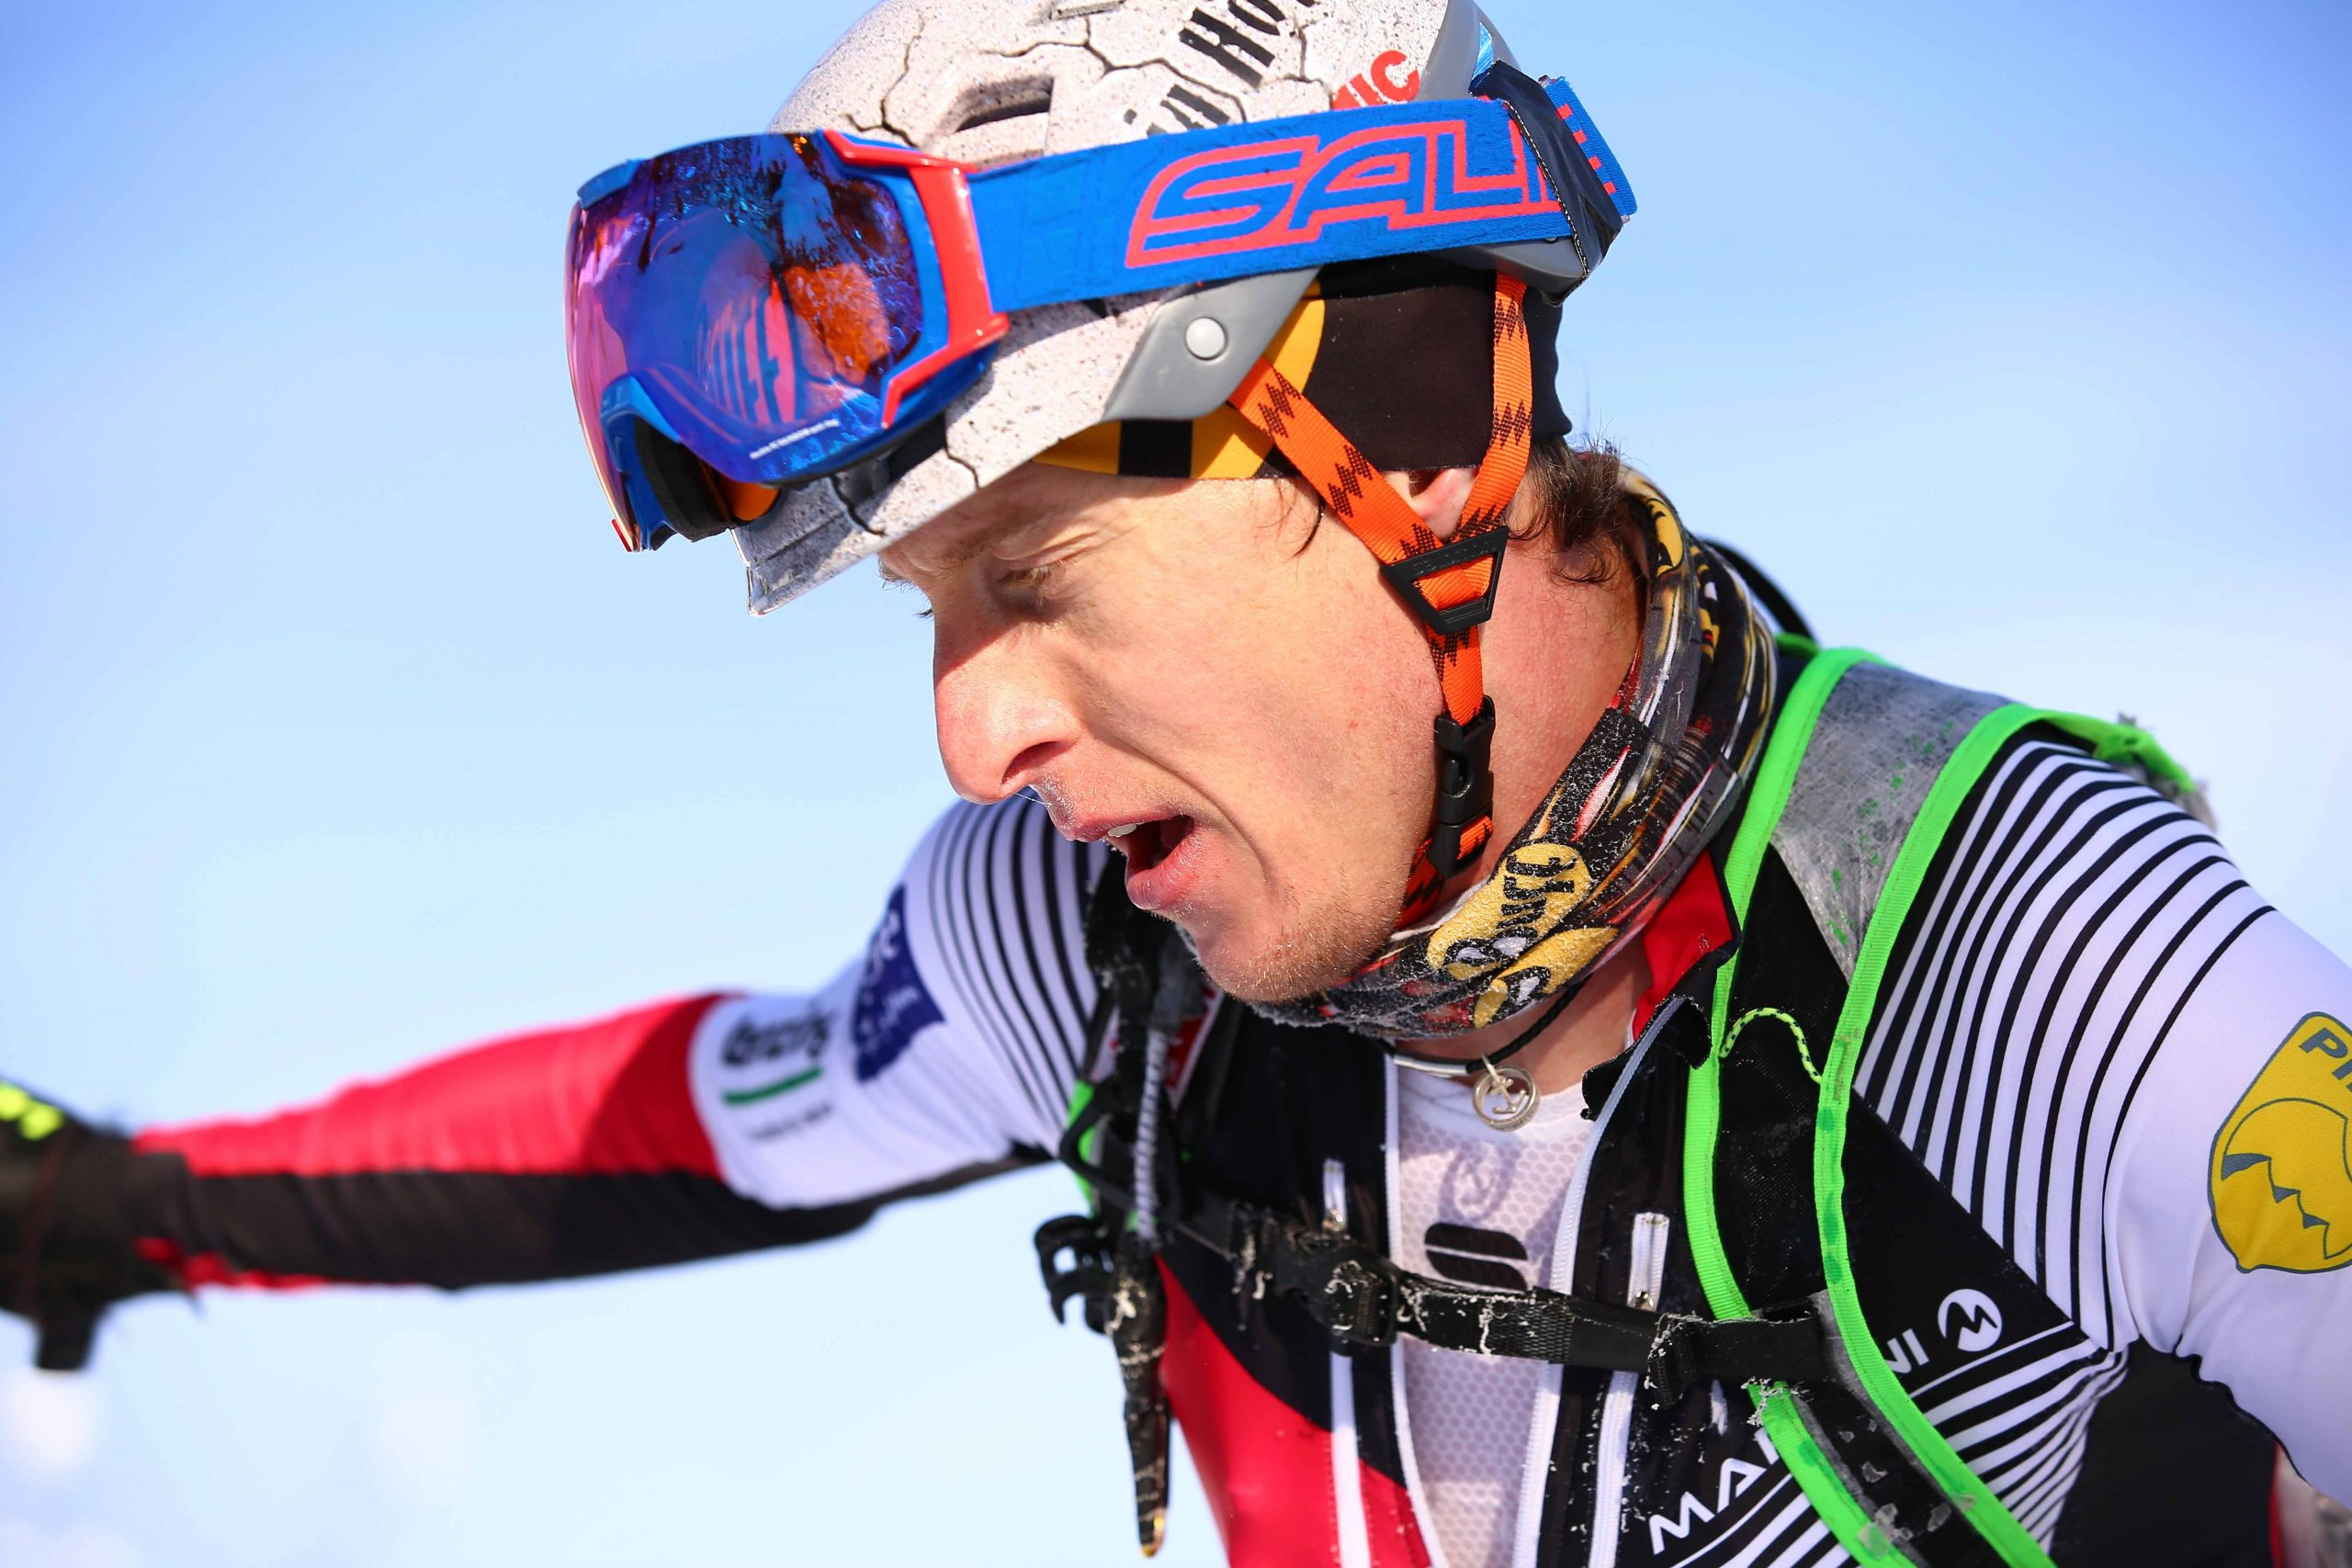 BISCHOFSHOFEN, AUSTRIA - JANUARY 20: Armin Hoefl of Austria during ISMF World Cup Individual Race on January 20, 2019 in Bischofshofen, Austria.